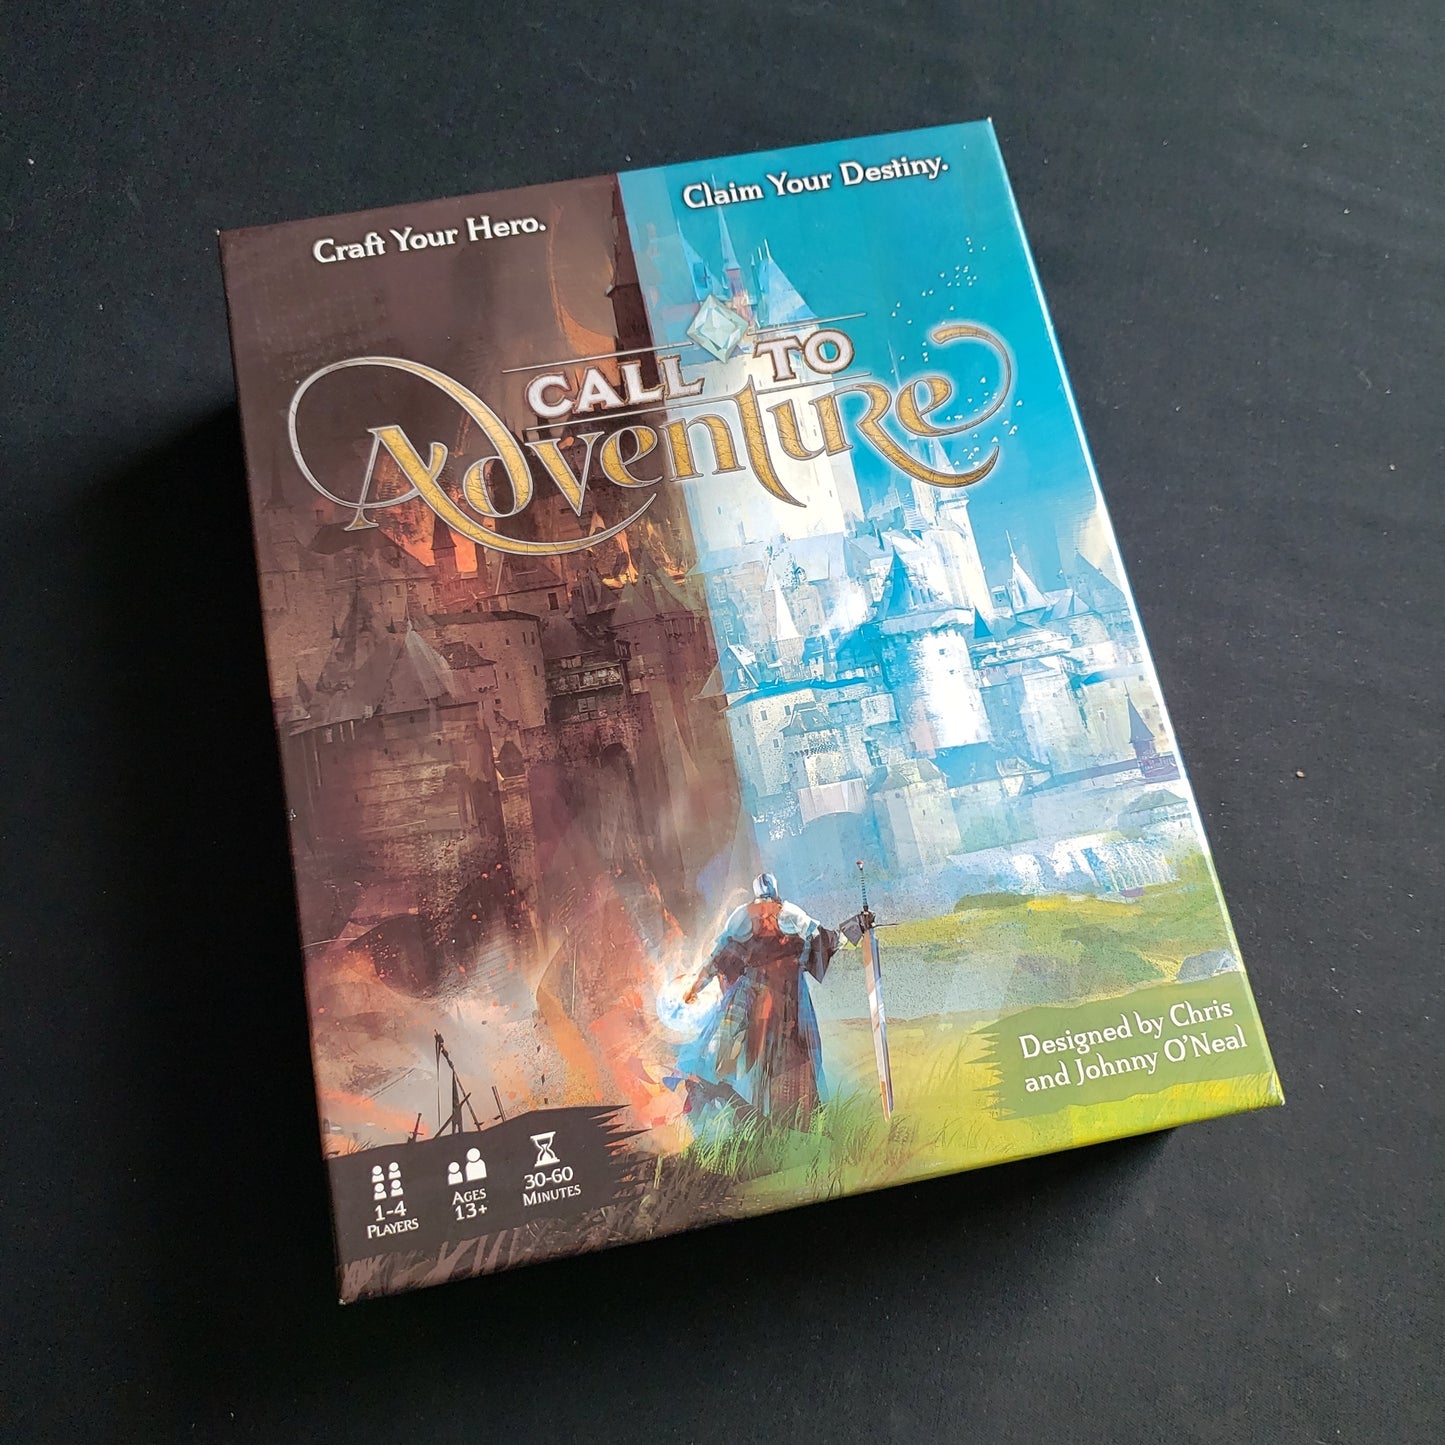 Image shows the front cover of the box of the Call to Adventure card game